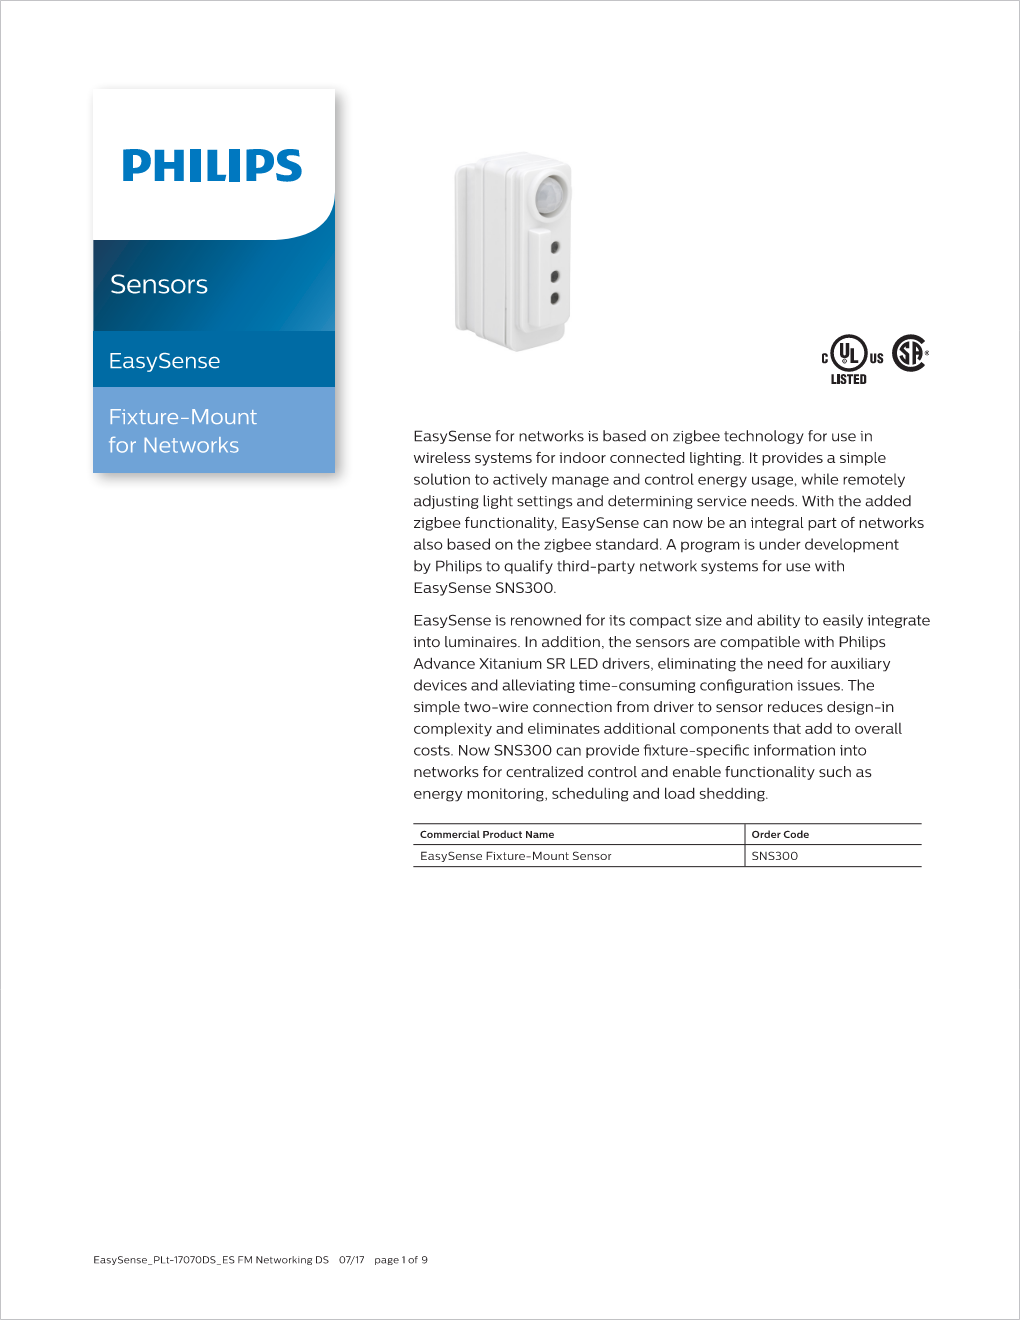 Philips_EasySense_SNS300_Fixture-Mount_for_Networking_Datasheet__PLt-17070DS__Page_001.png